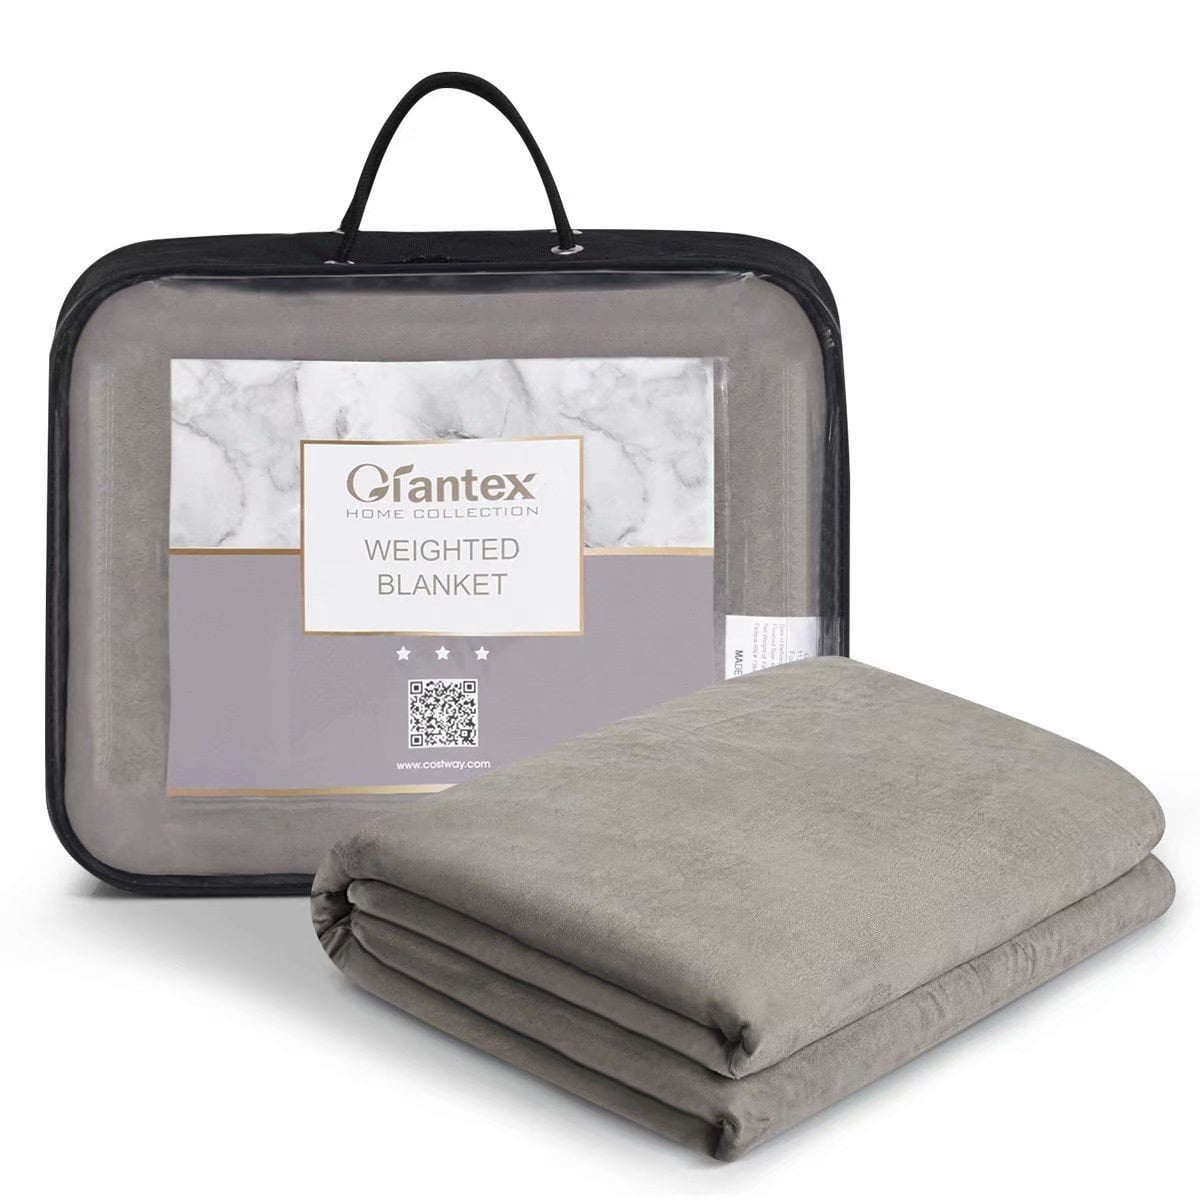 Glass Beads With Cover, 20 Pounds Gravity Induction Blanket - Walmart